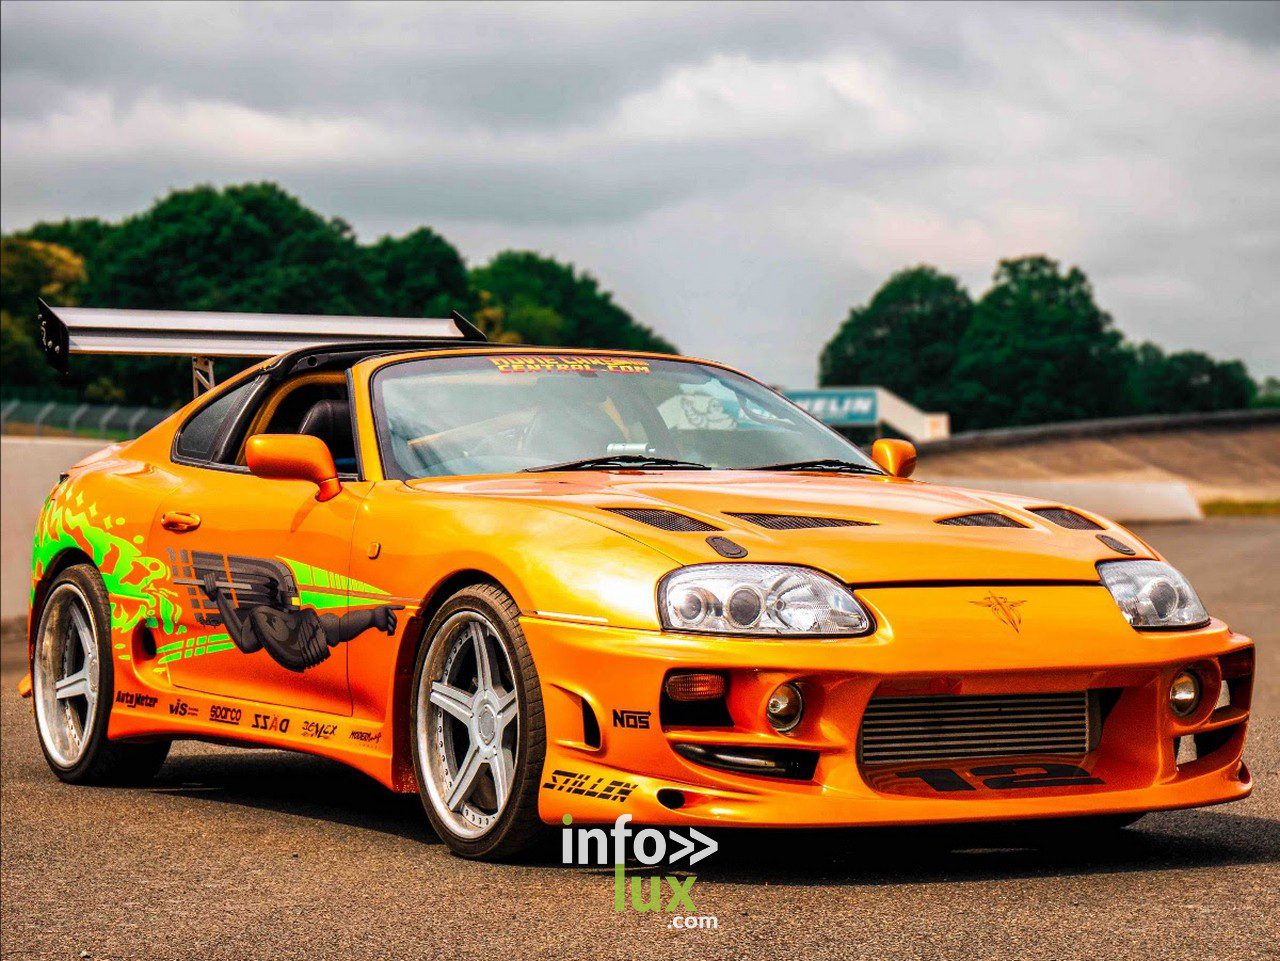 SpaAsia propose une expo Fast & Furious